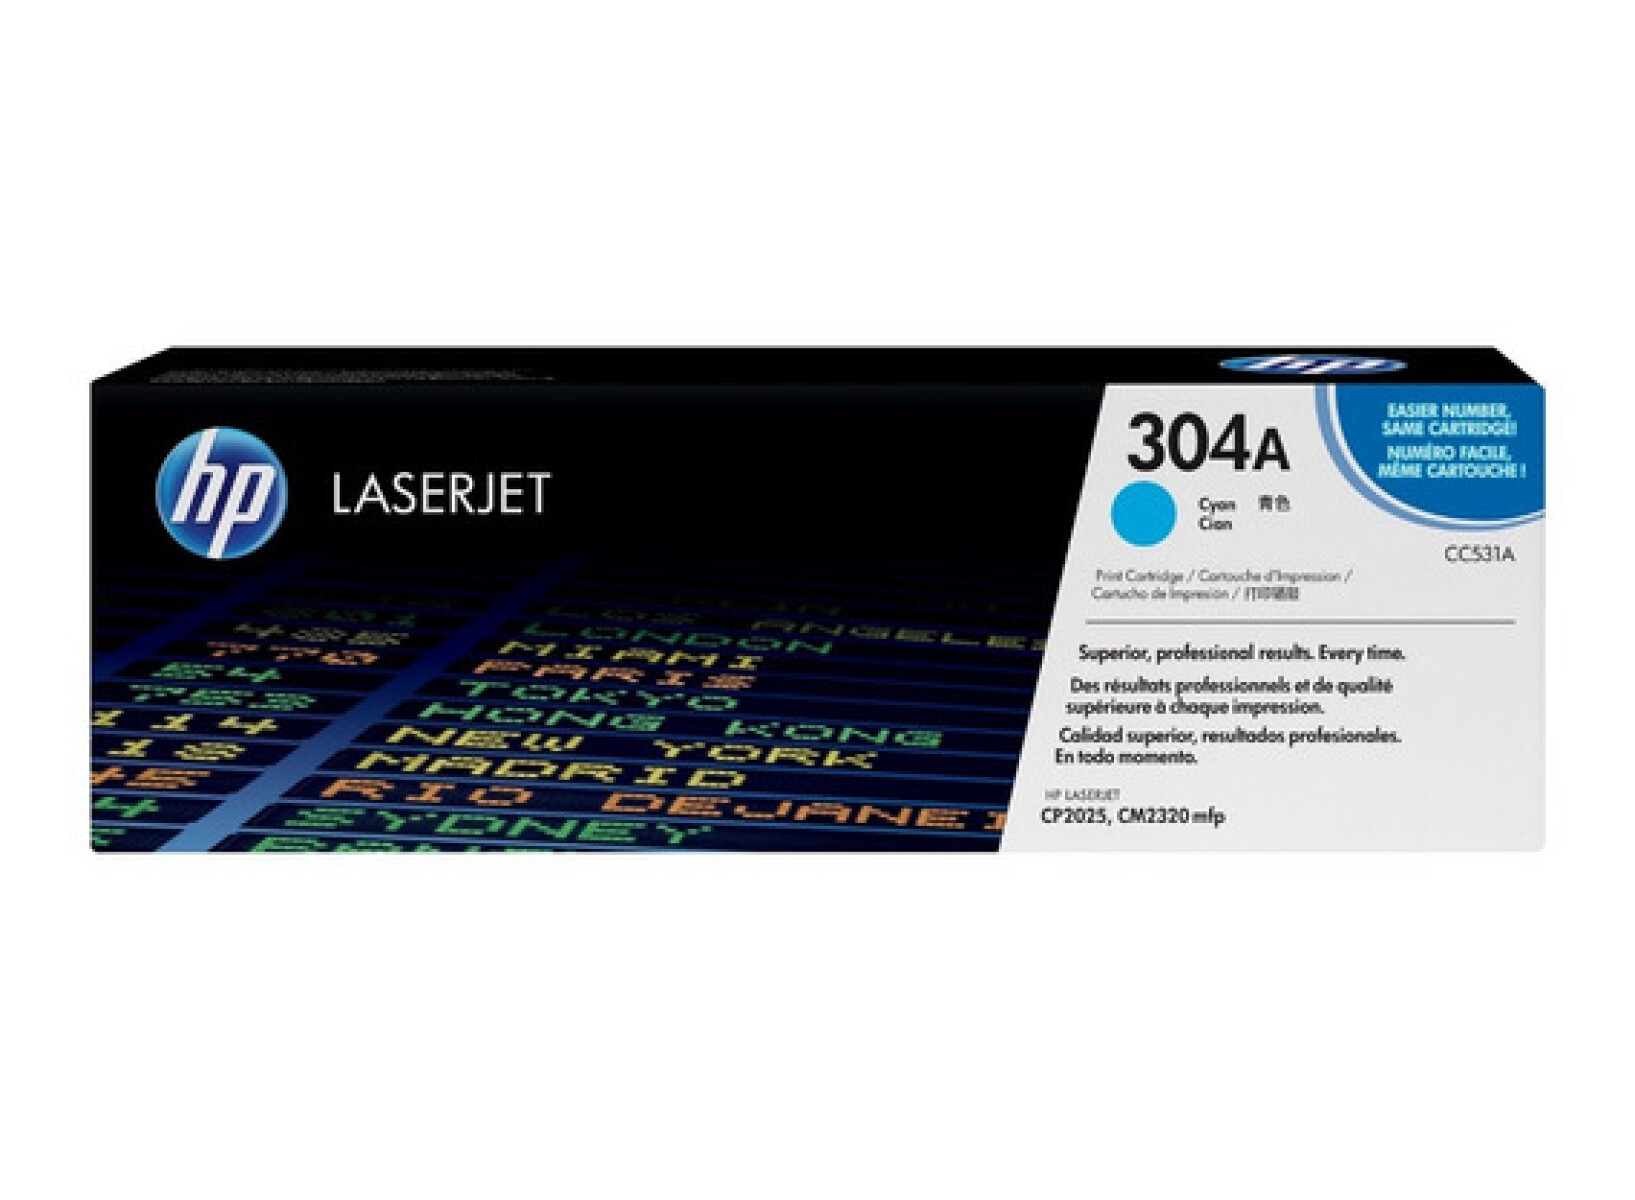 HP TONER CC531A 304A CYAN 2020/2025/2030/2320 DN 2800 CPS - Hp Toner Cc531a 304a Cyan 2020/2025/2030/2320 Dn 2800 Cps 